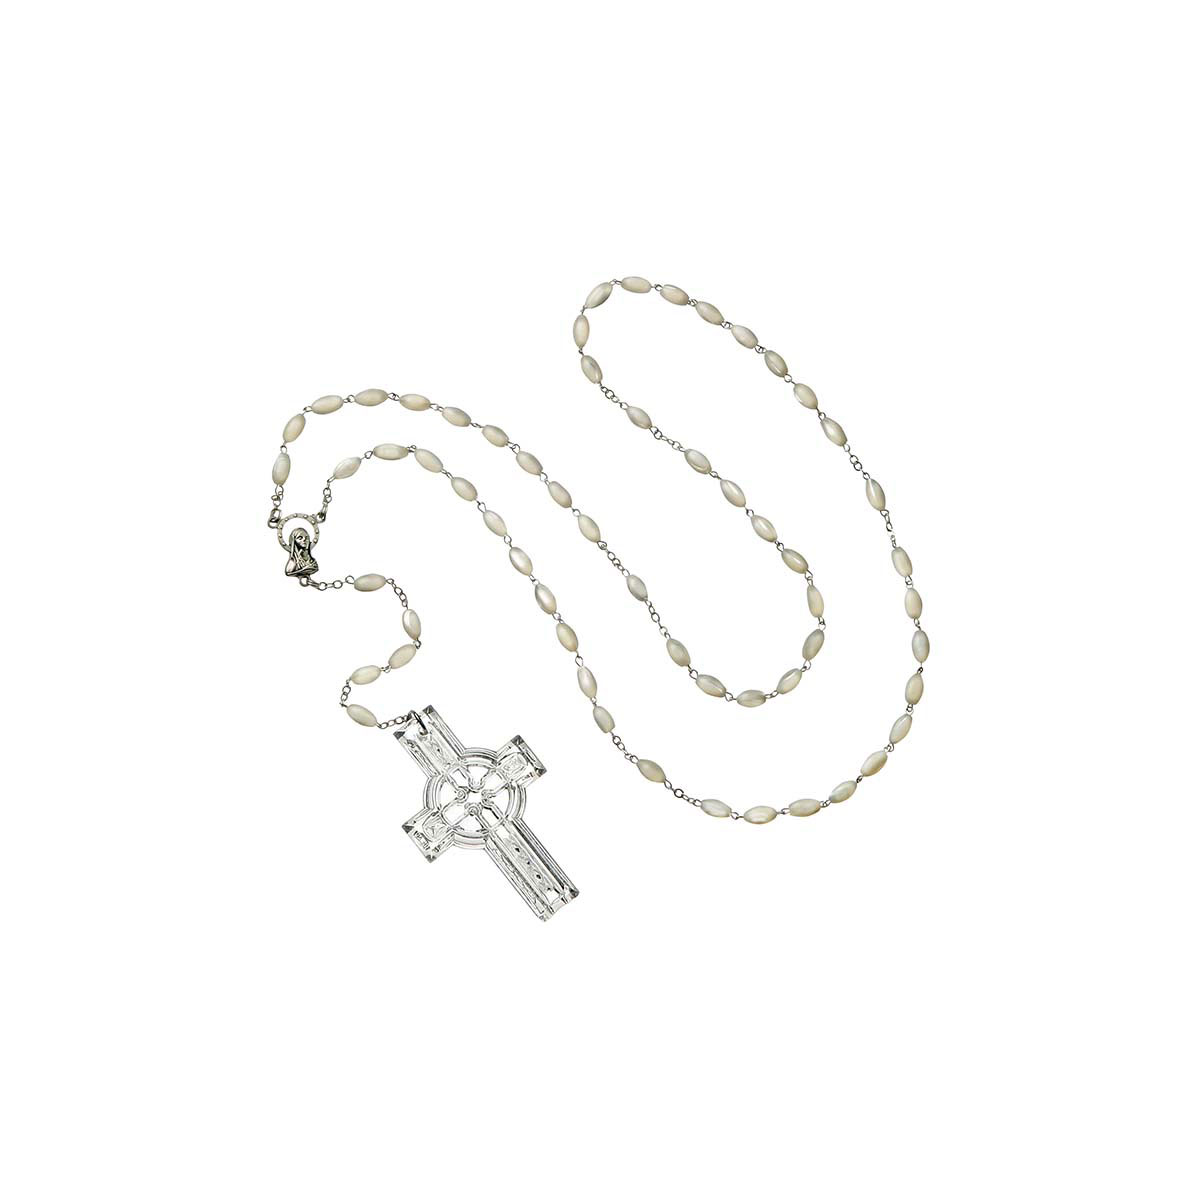 Waterford Crystal, Giftology Rosary Beads